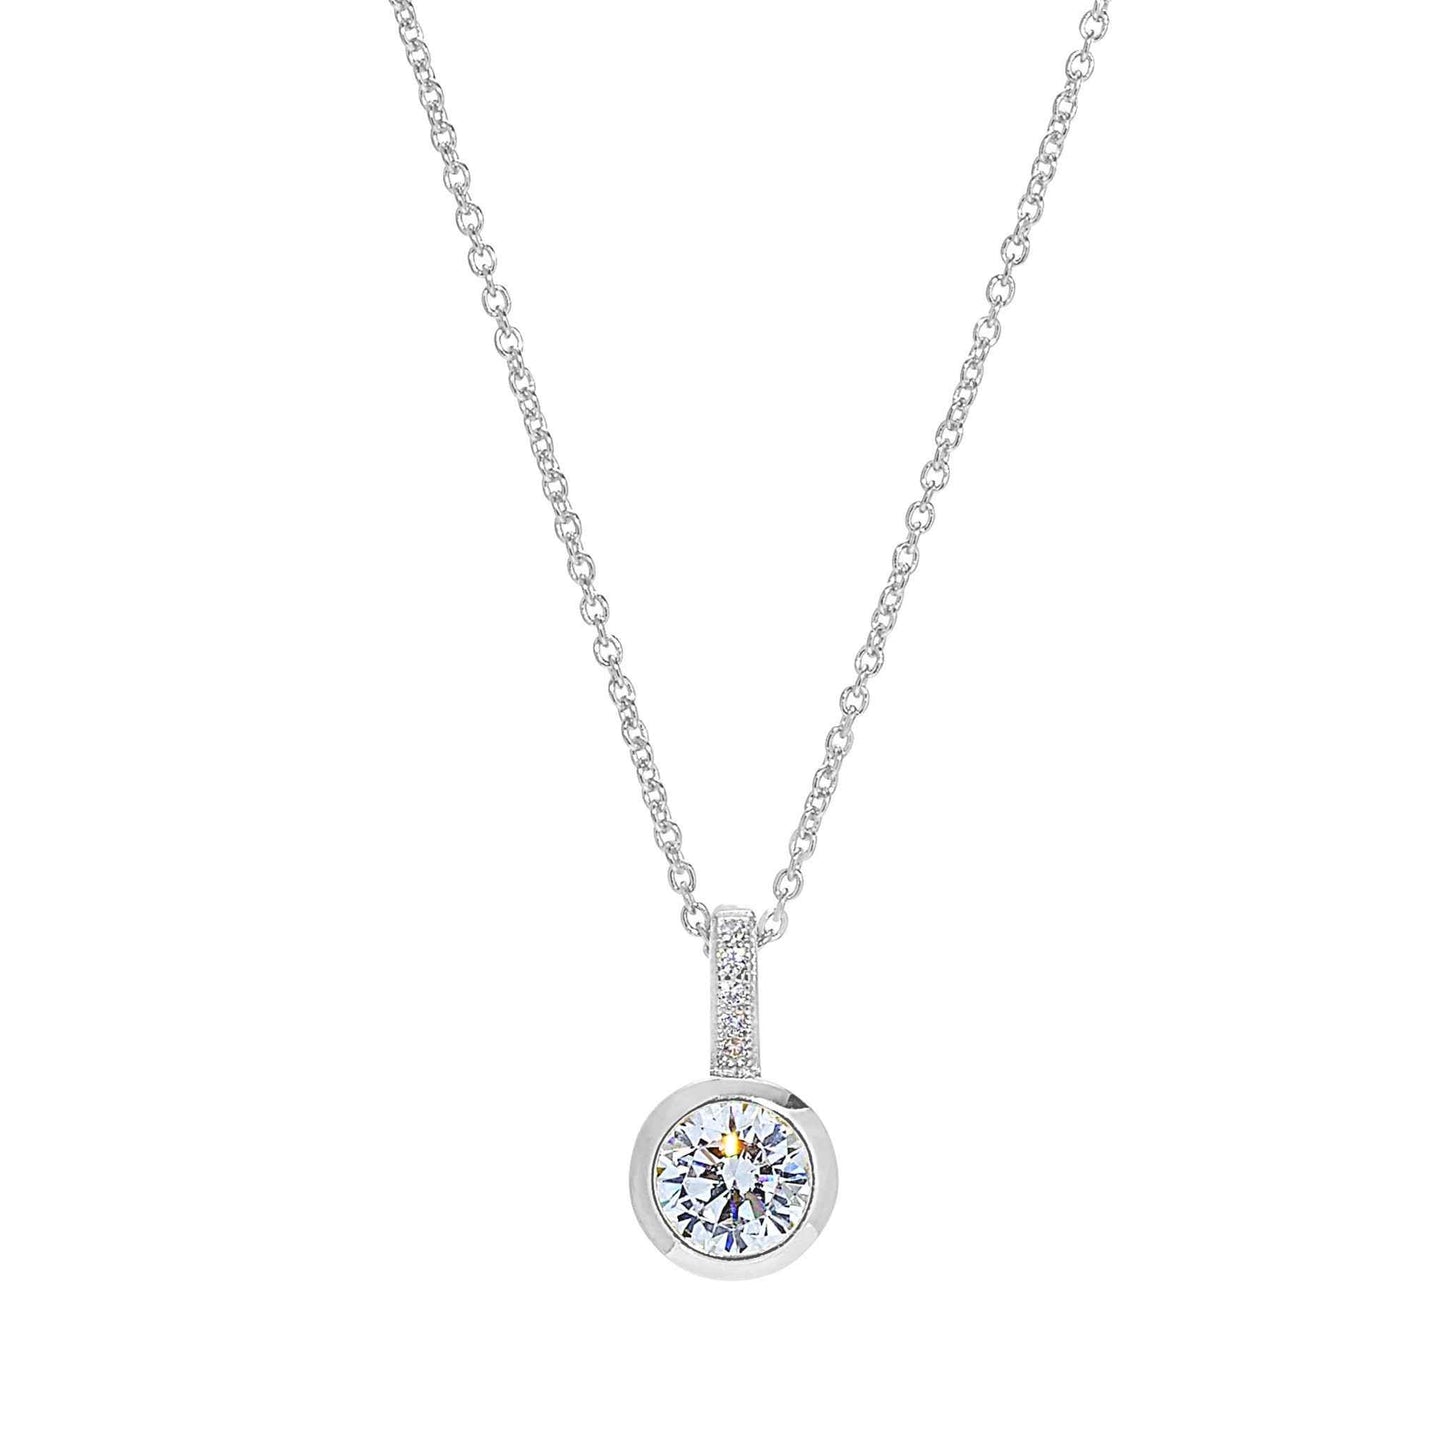 A drop bezel necklace with simulated diamonds displayed on a neutral white background.